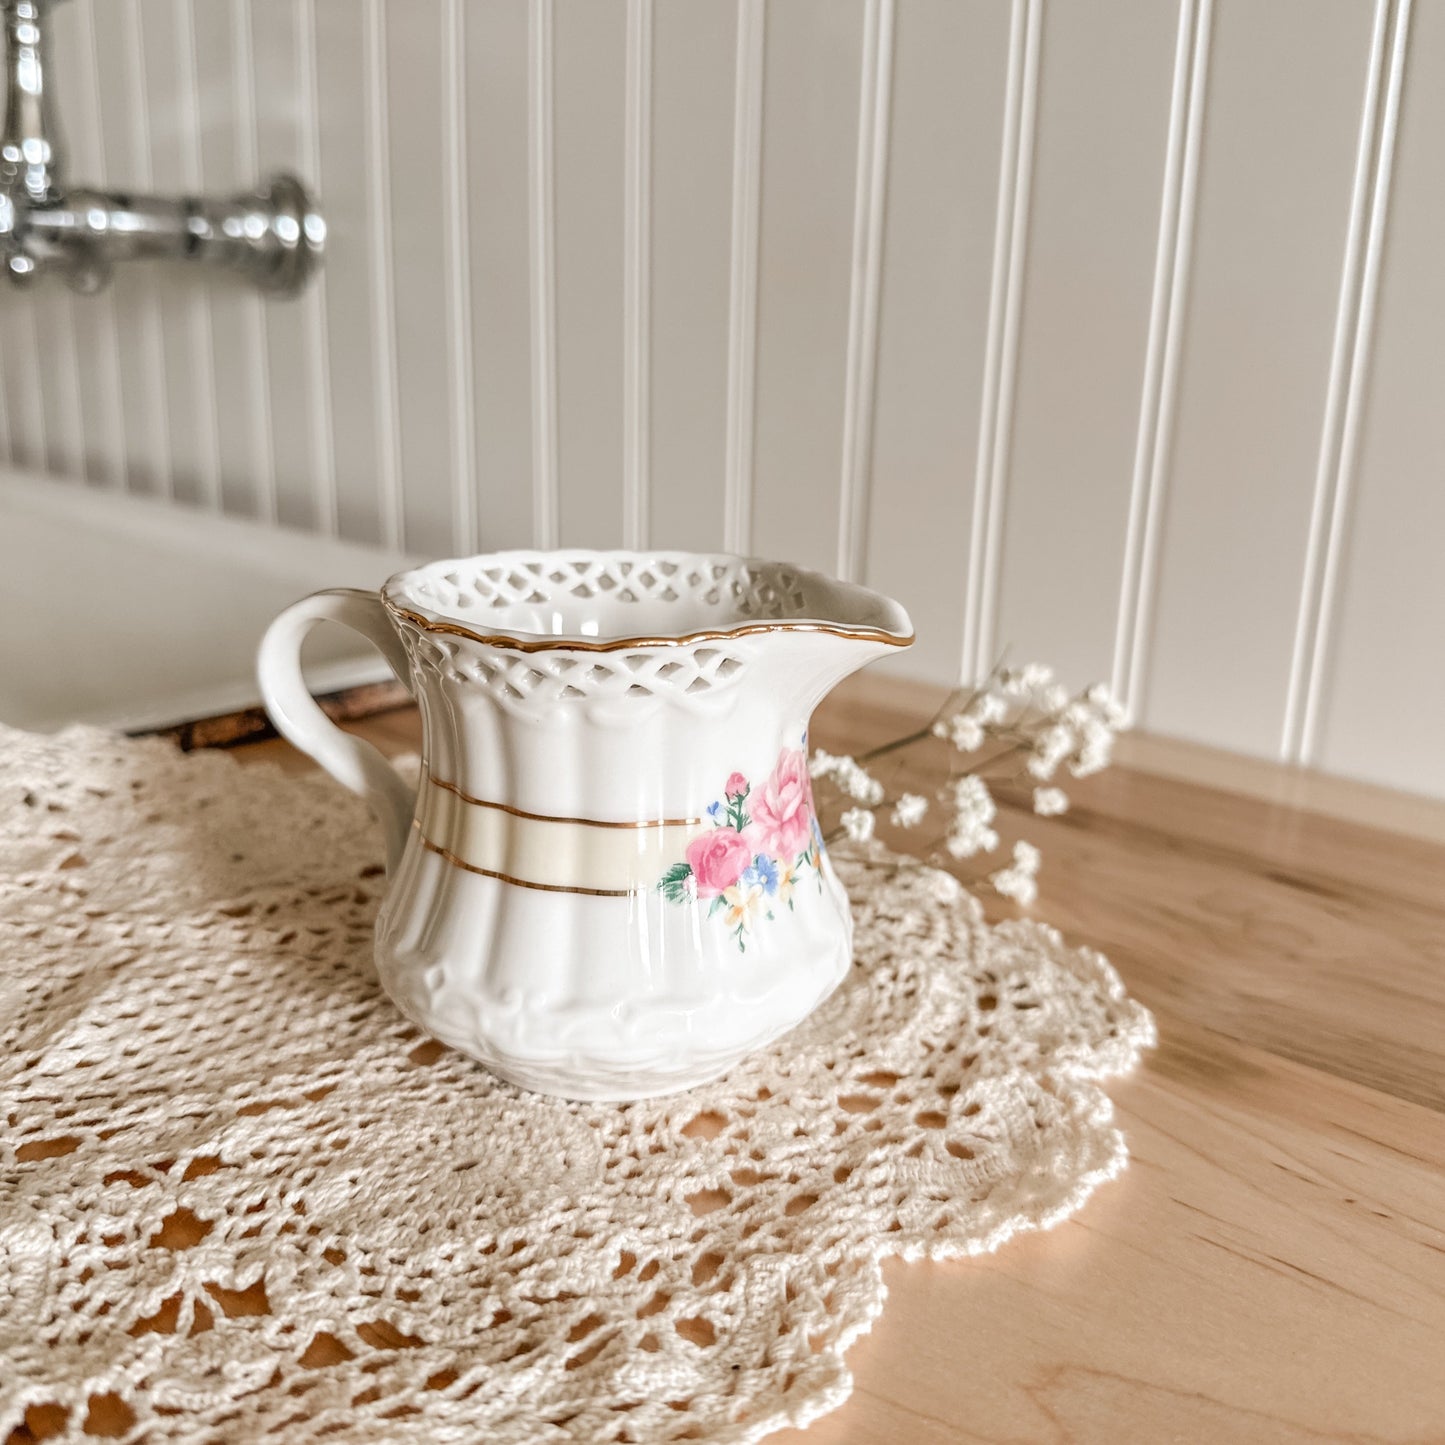 Woven Floral Antique Inspired Creamer